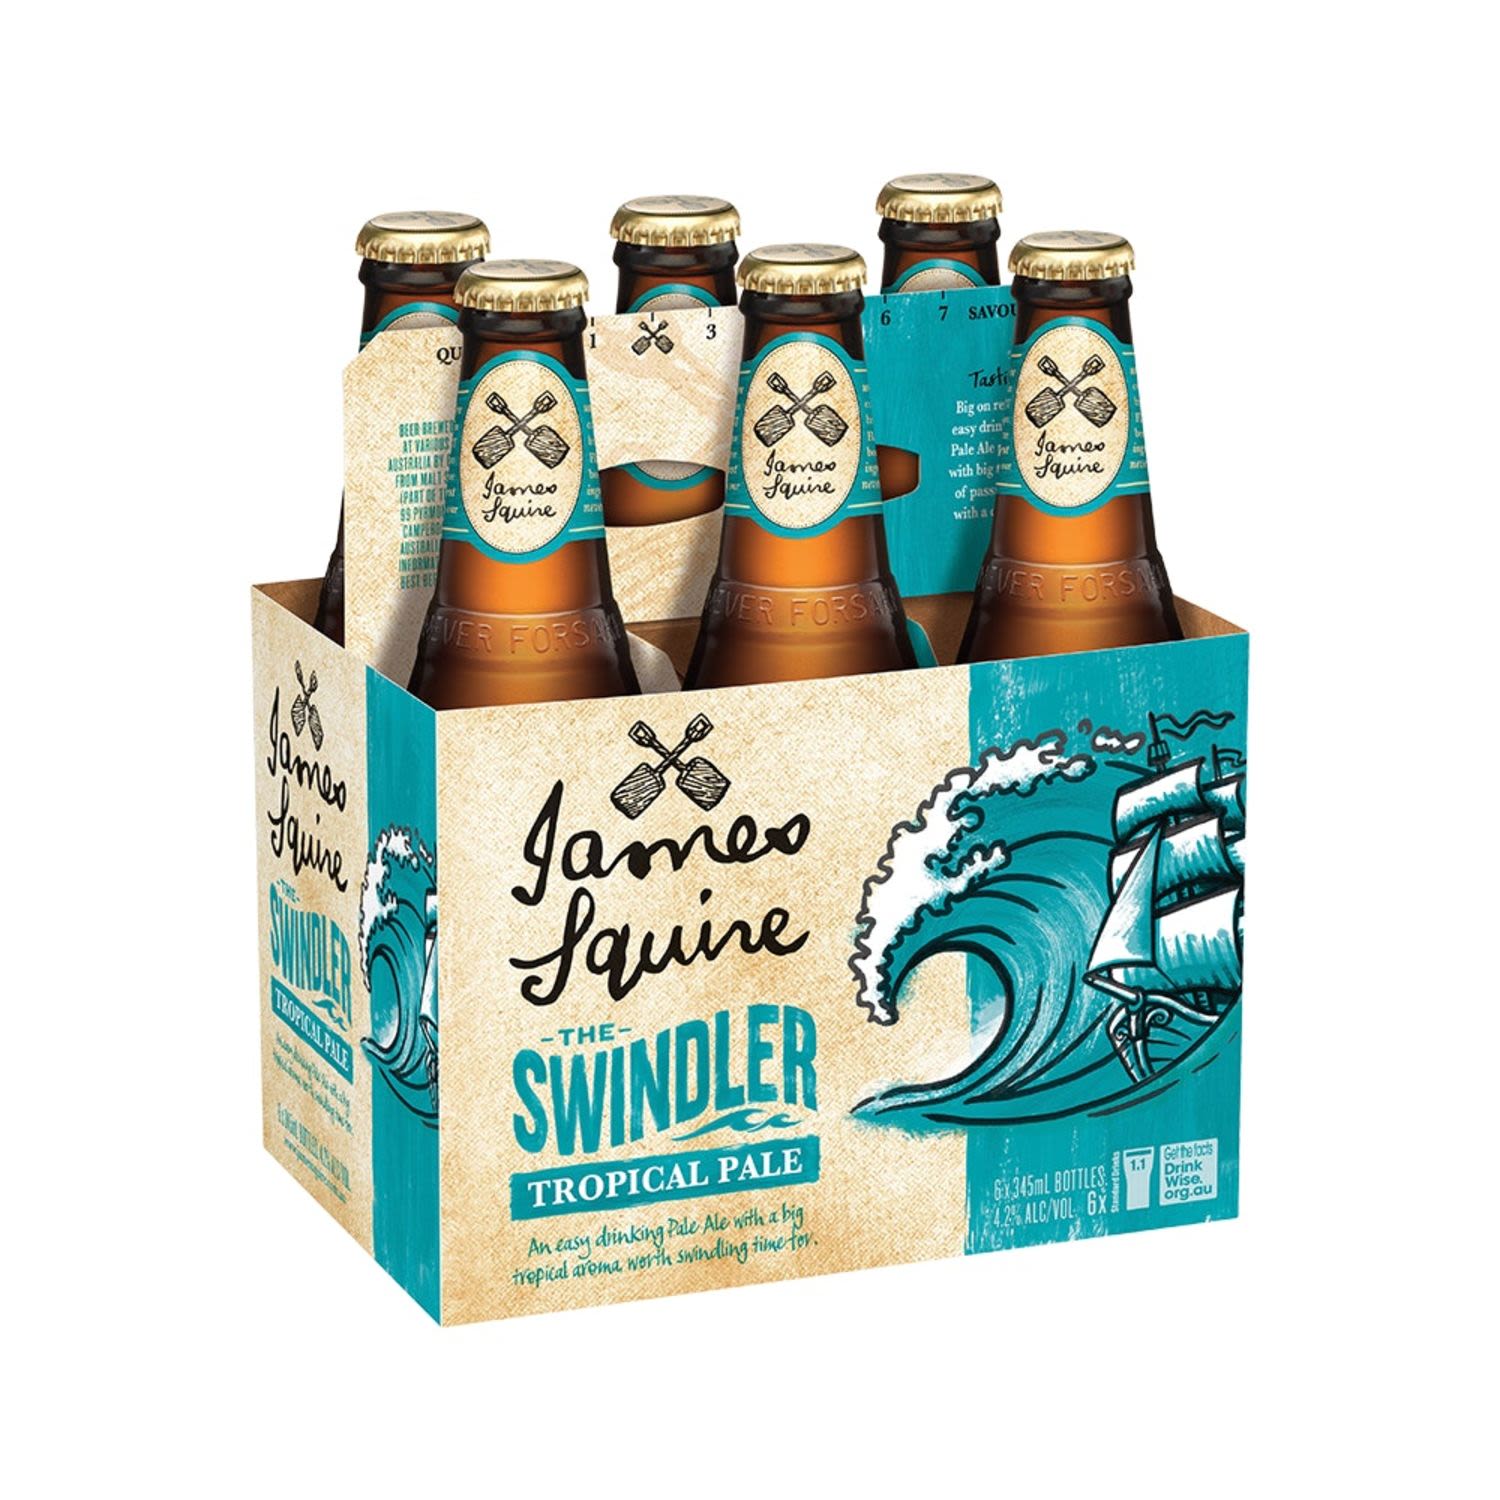 James Squire The Swindler Tropical Pale Ale Bottle 345mL 6 Pack